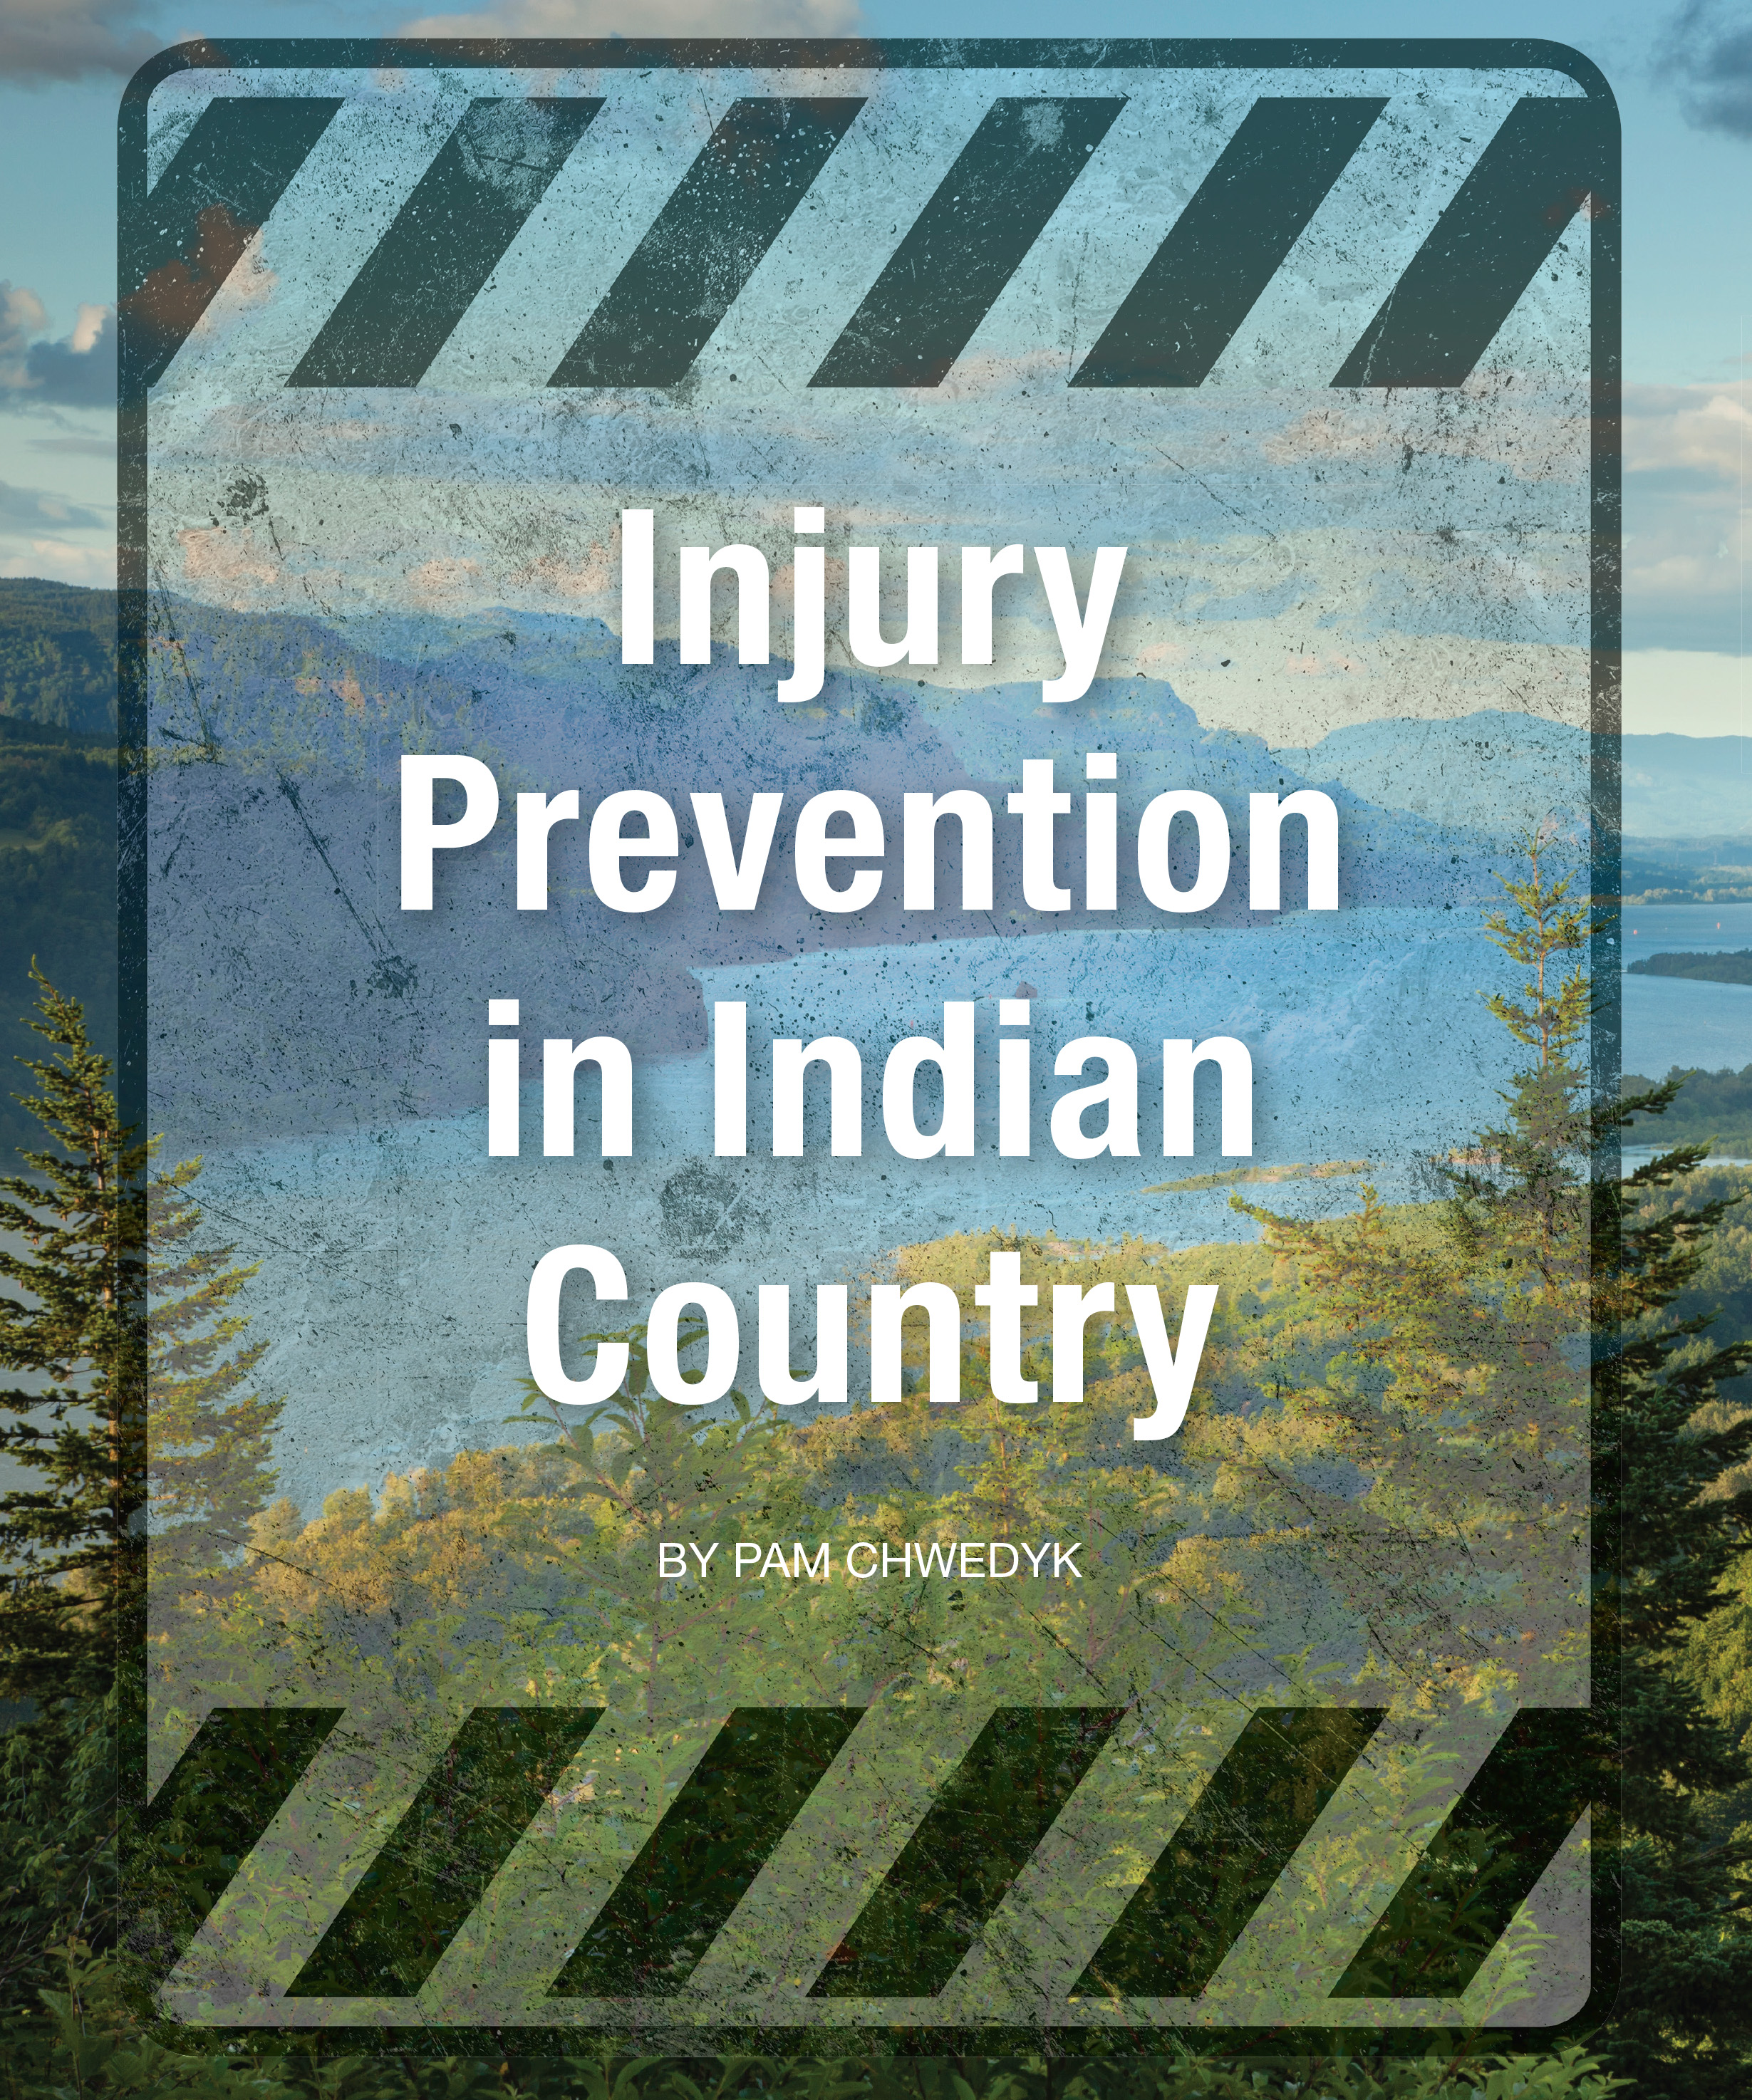 Injury Prevention in Indian Country